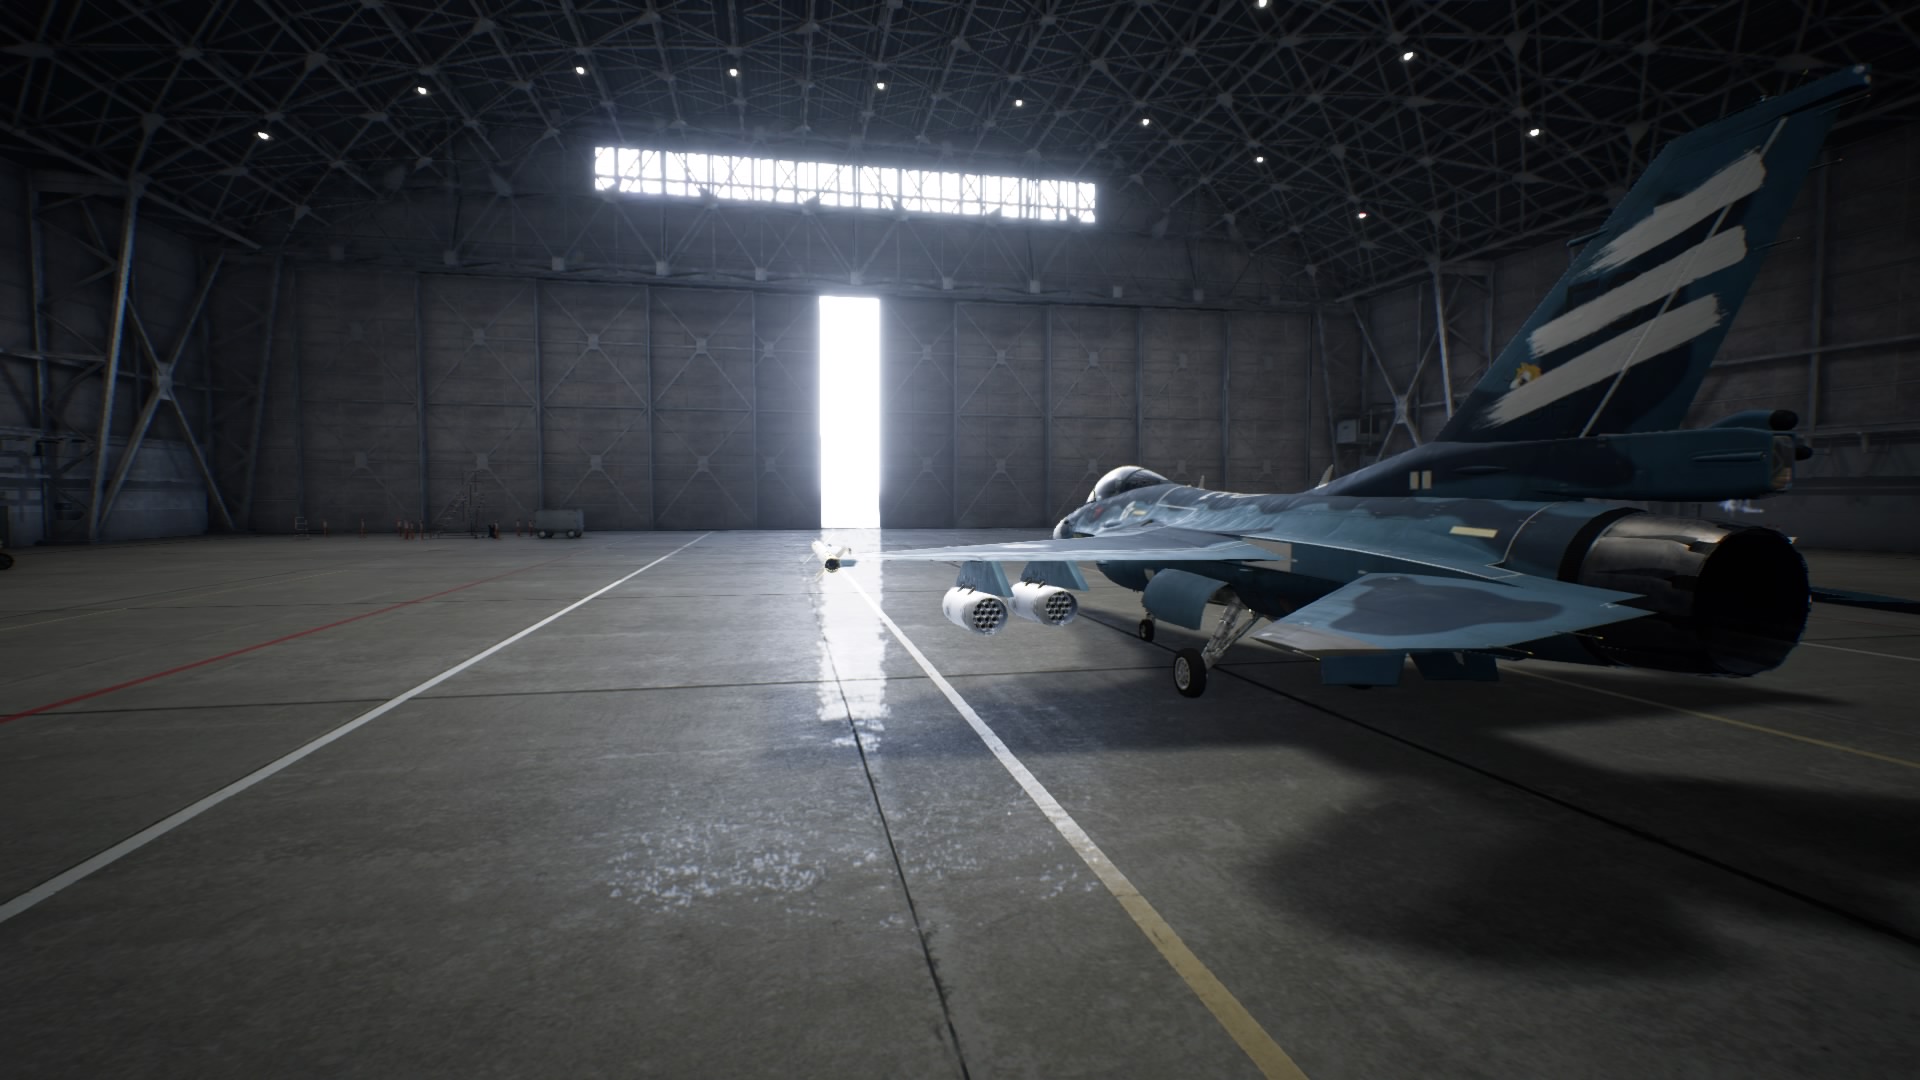 Ace Combat 7' Review: It's Time To Return To The Intense World Of  Strangereal Flight Combat